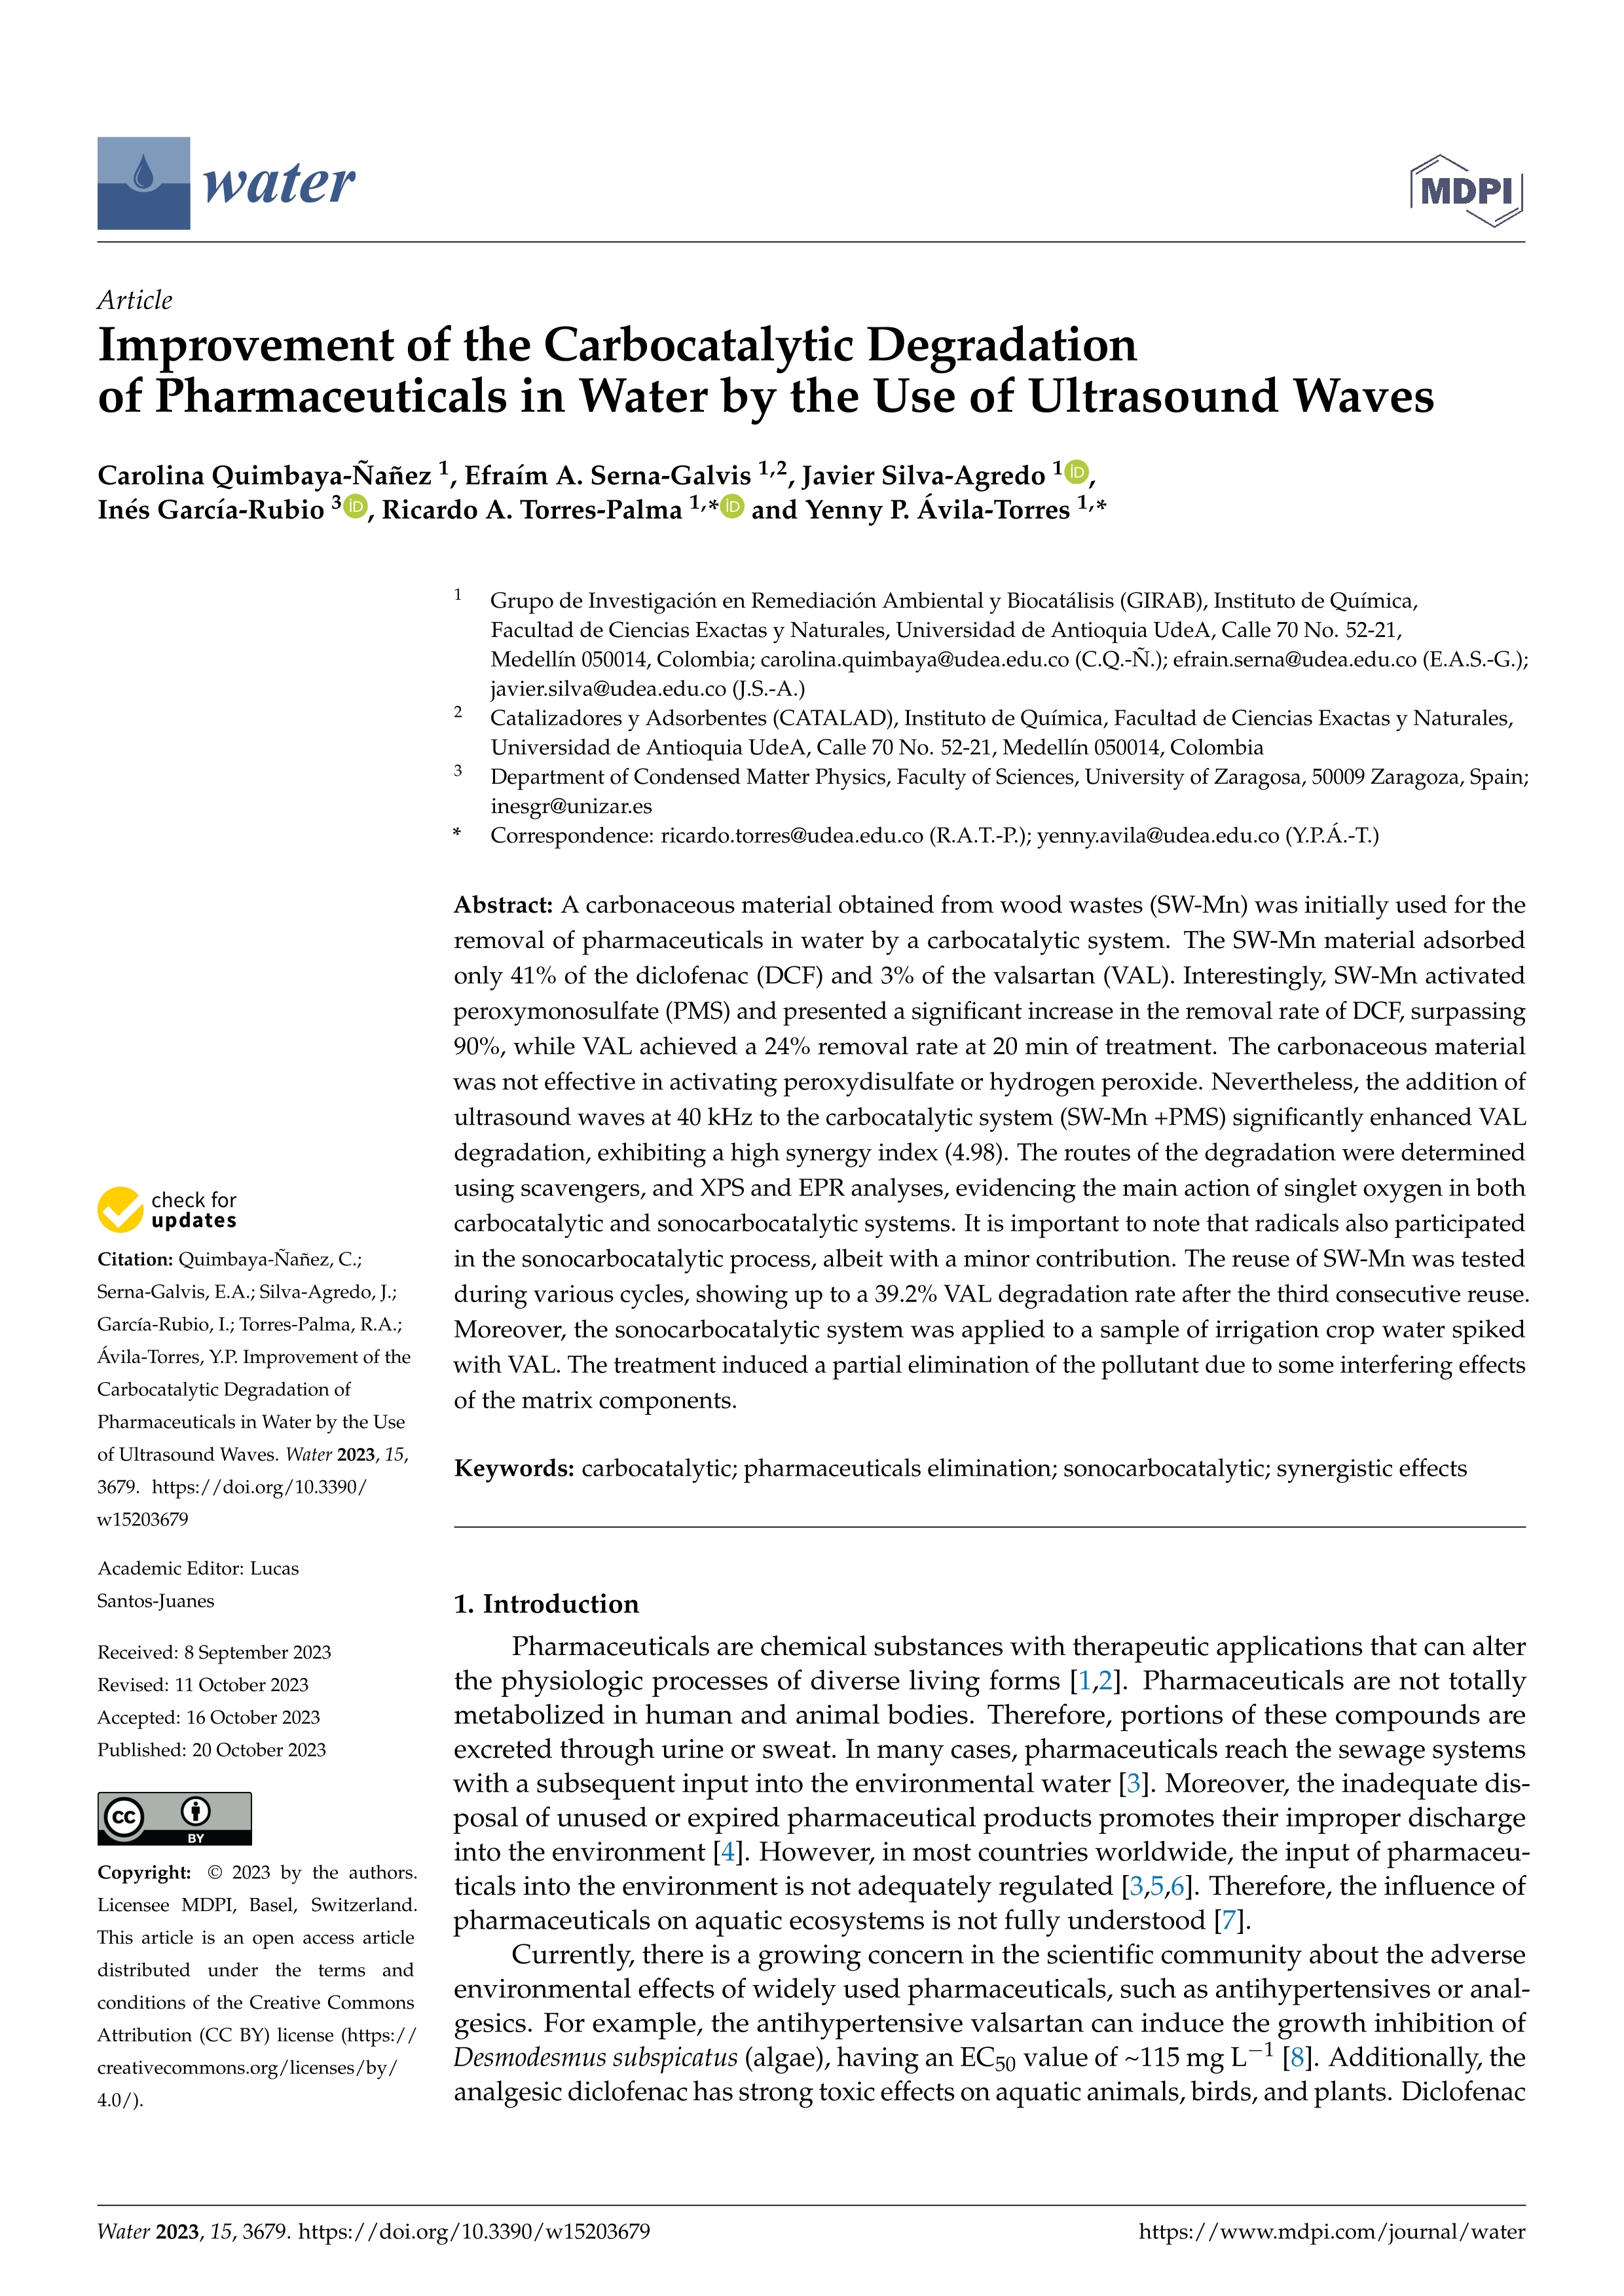 Improvement of the carbocatalytic degradation of pharmaceuticals in water by the use of ultrasound waves